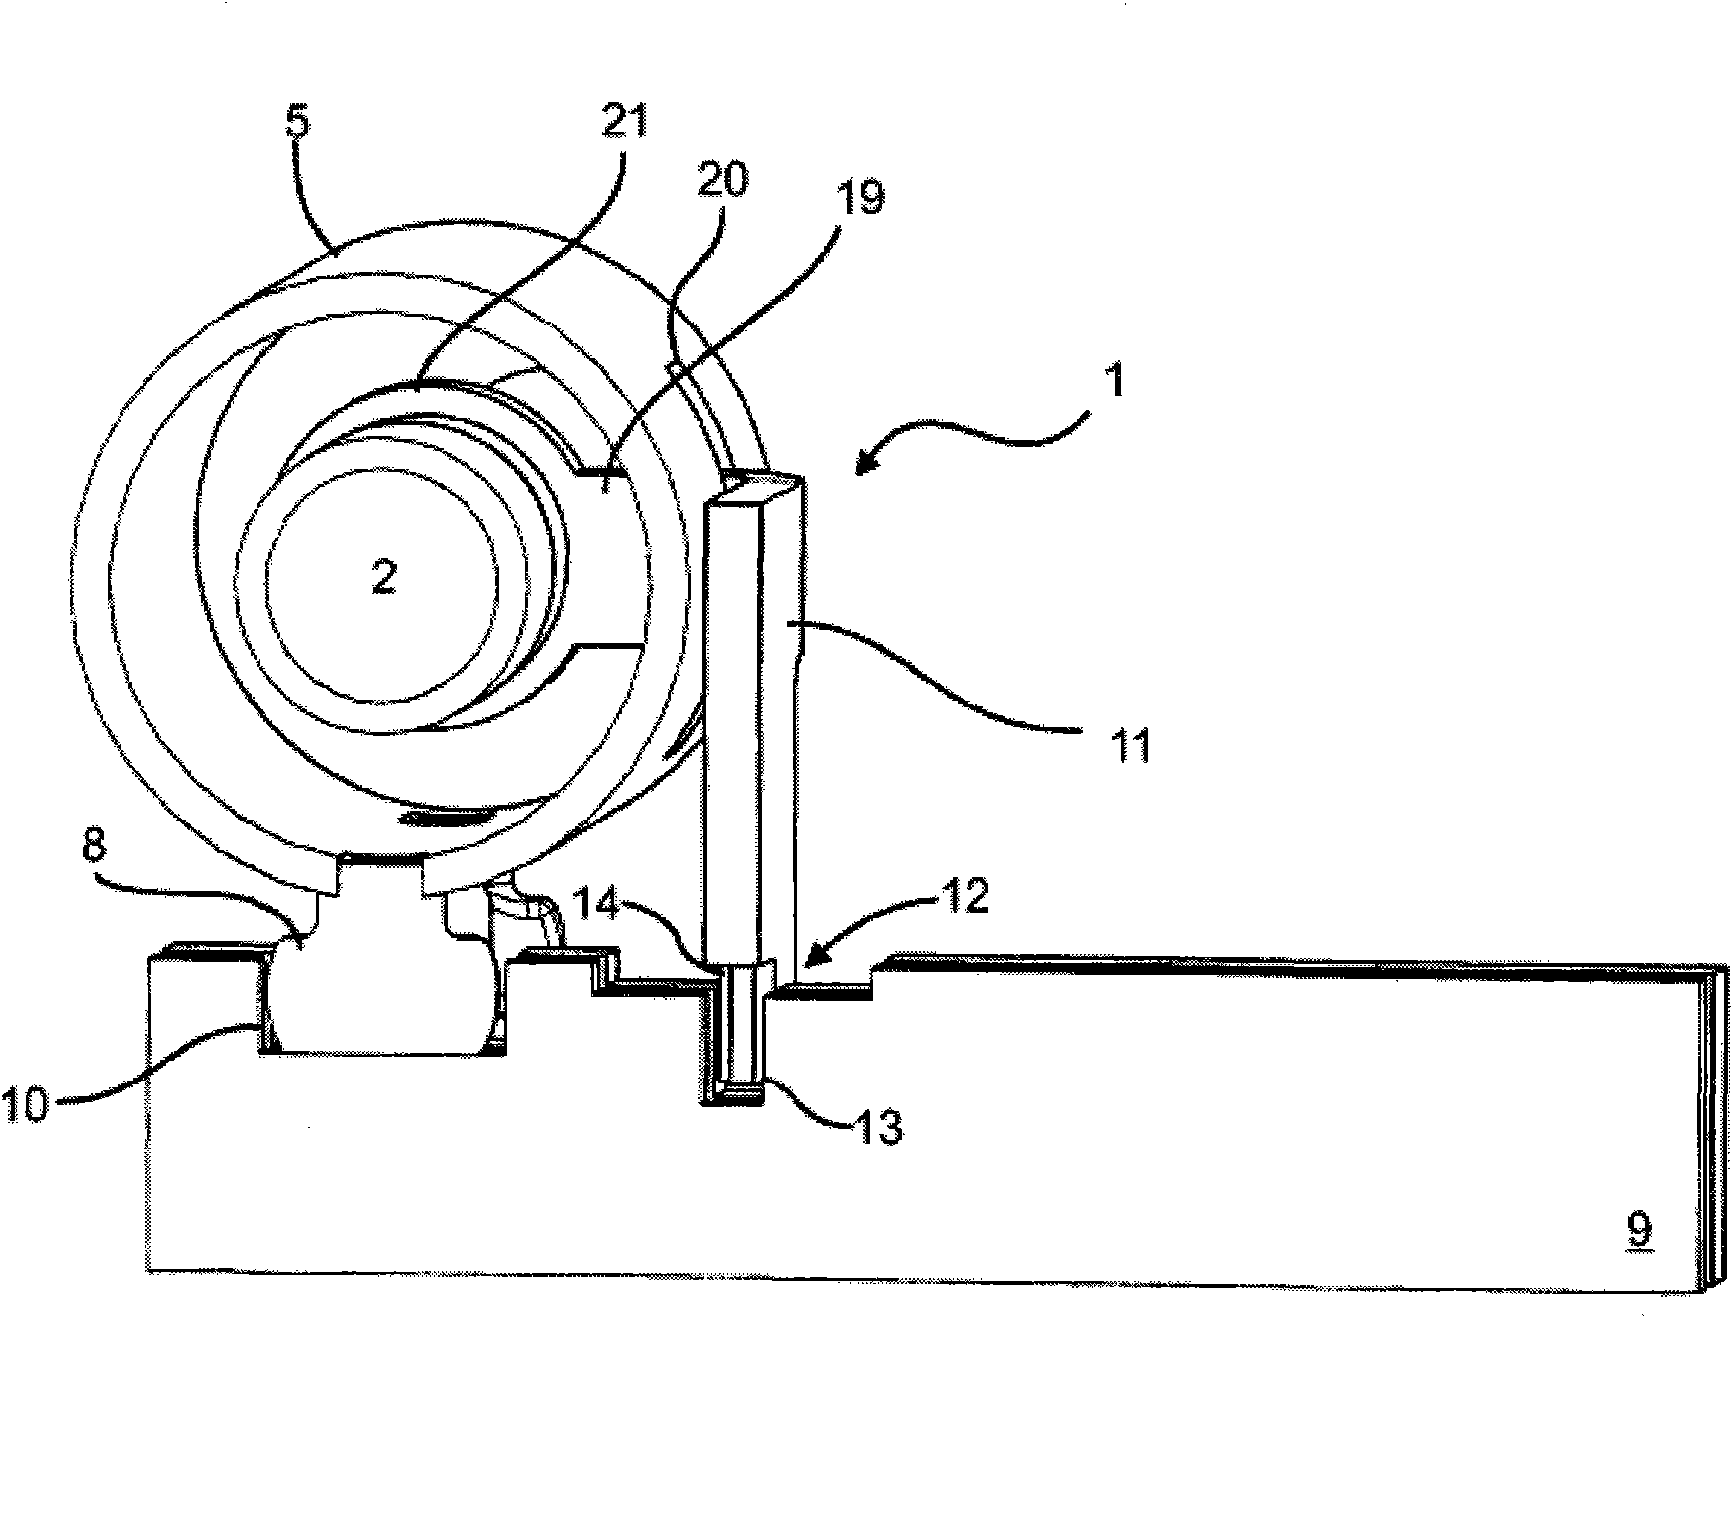 Shifting device for a transmission of a motor vehicle having a locking device